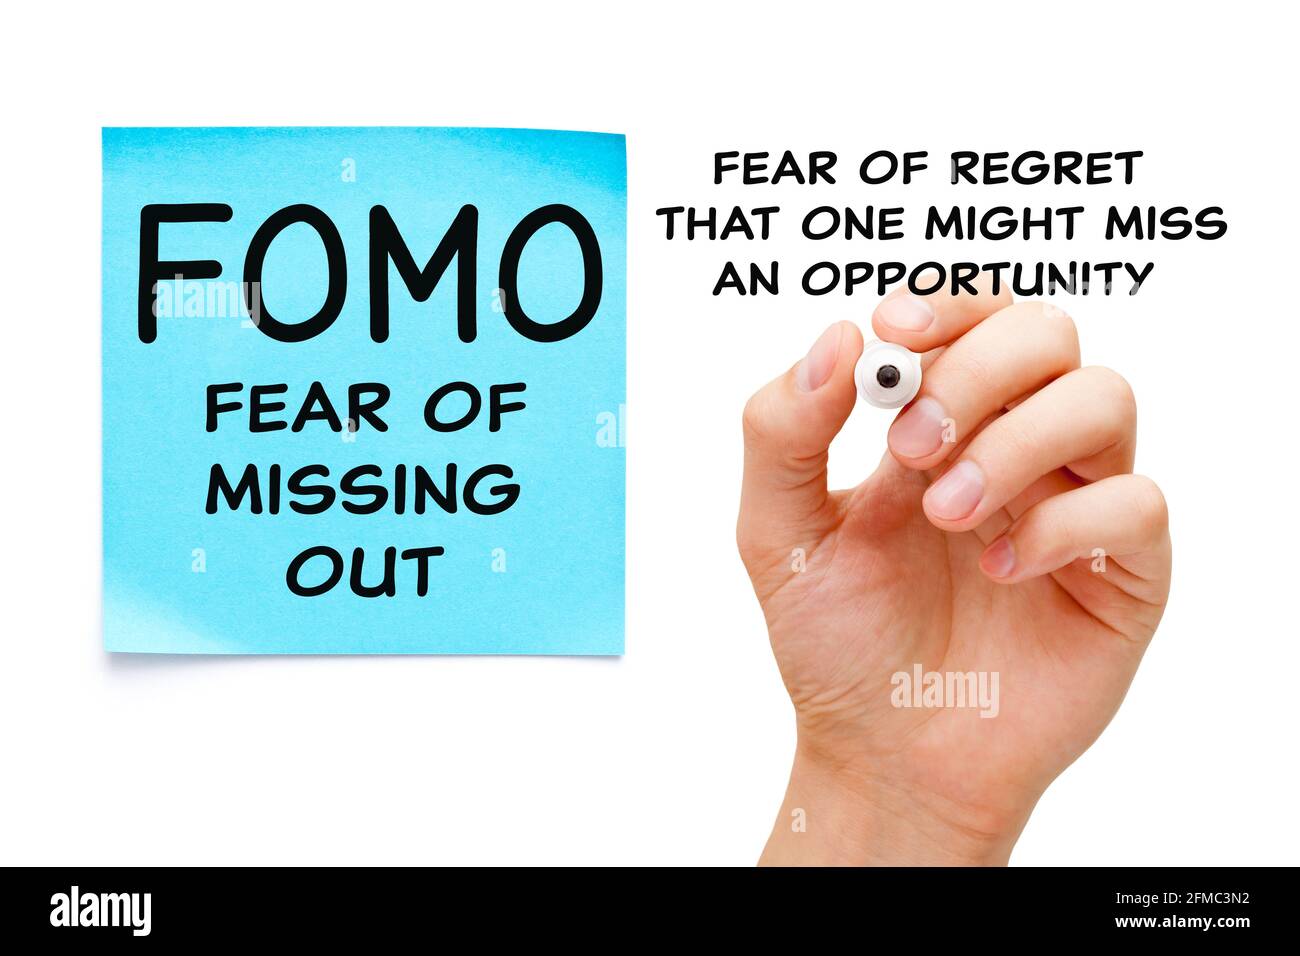 Hand writing a concept about Fear Of Missing Out - FOMO social anxiety disorder. Fear of regret that one might miss an opportunity. Stock Photo